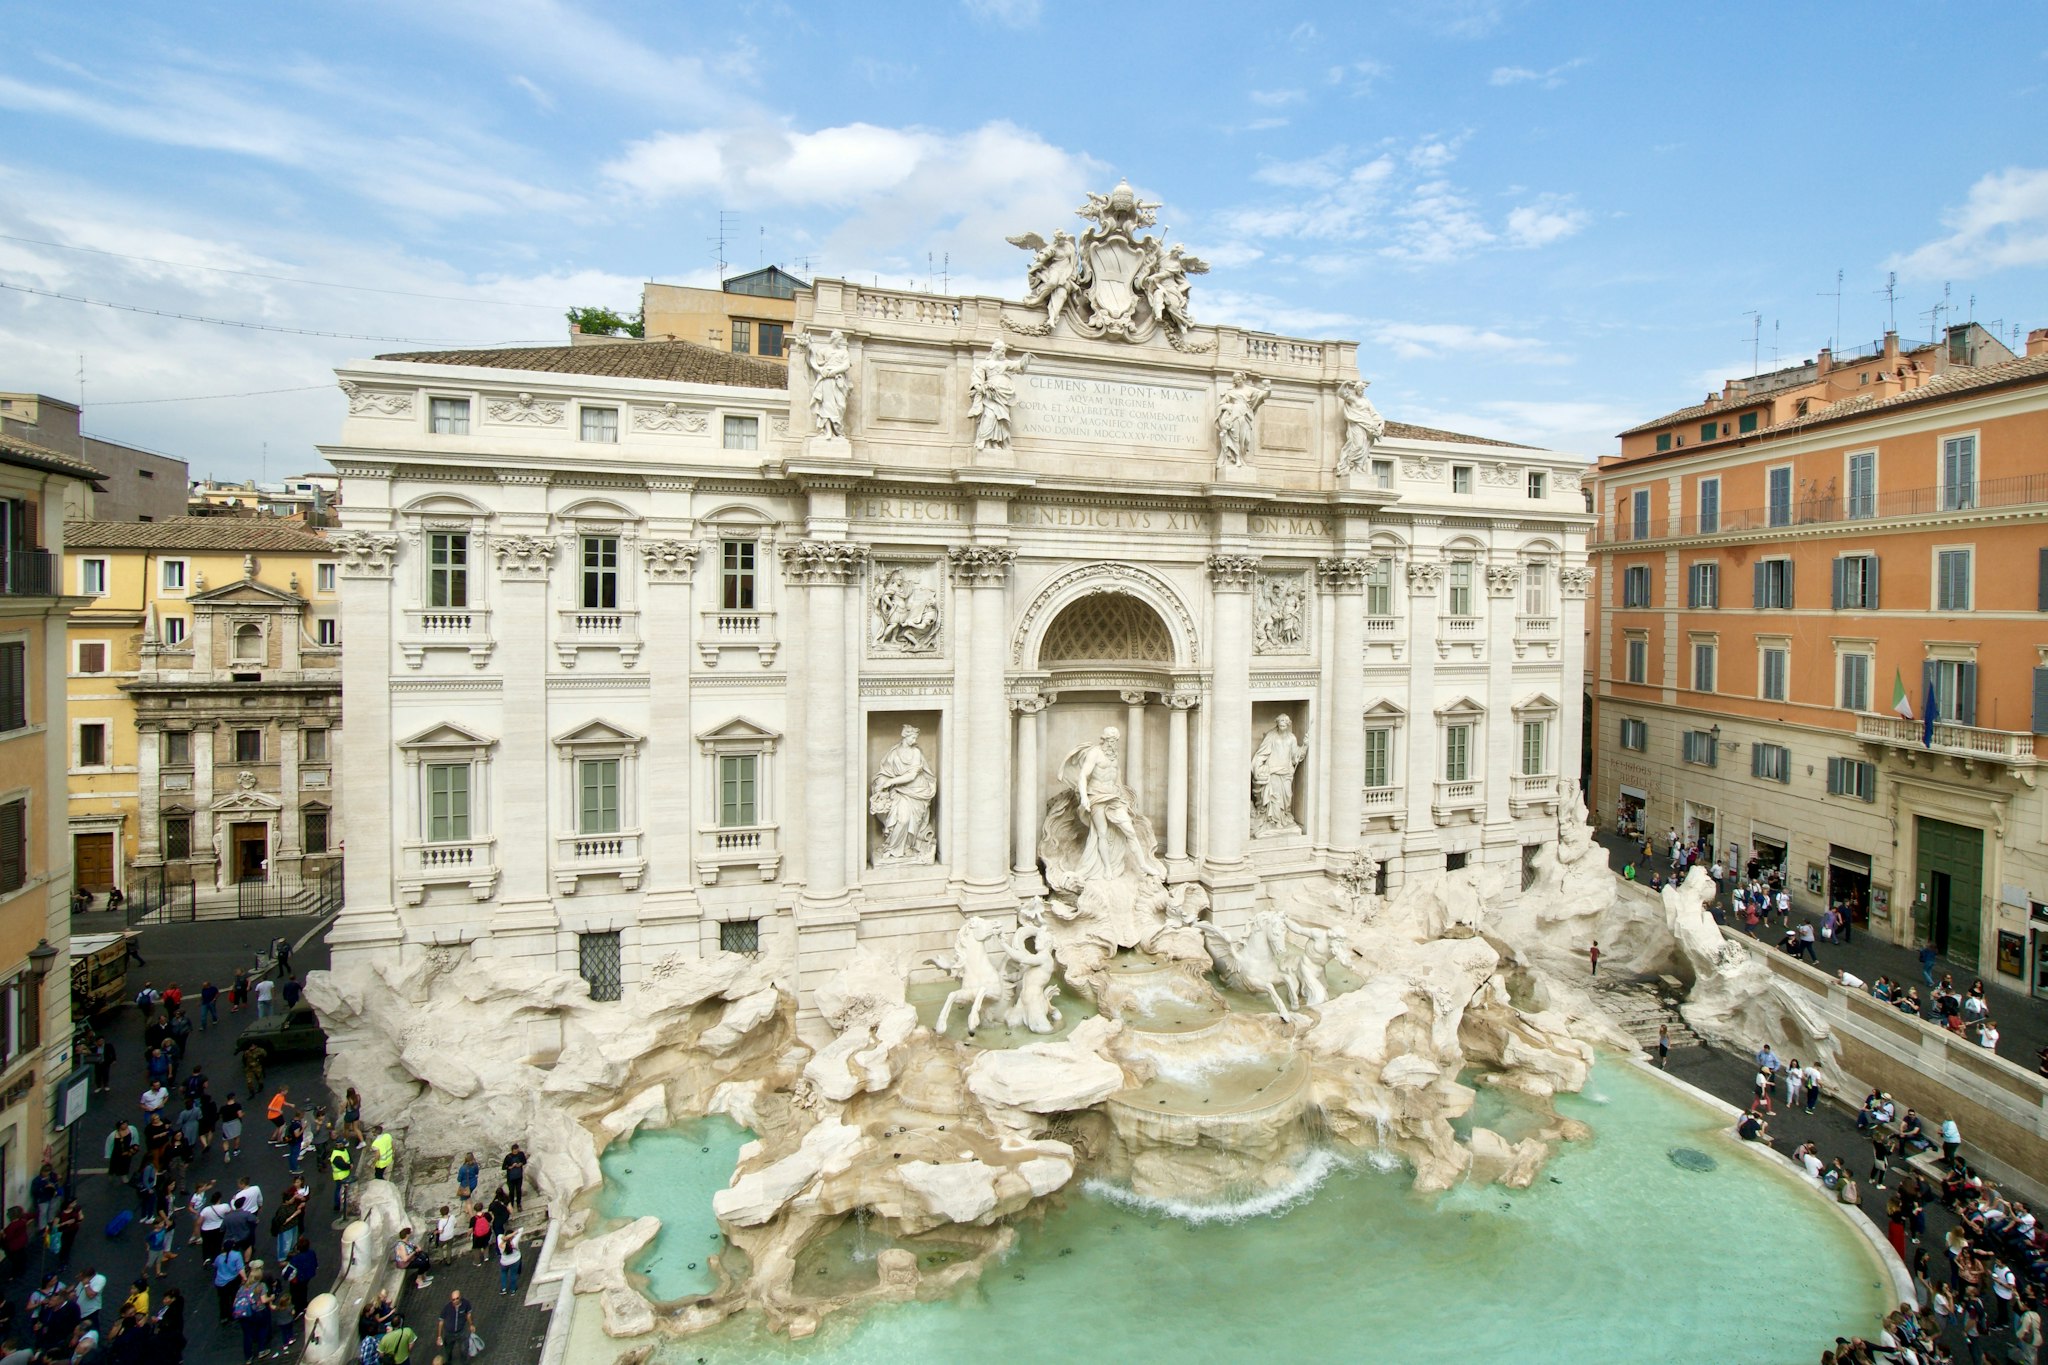 View of Trevi Fountain from nearby hotel (Photo: Kyle Valenta)